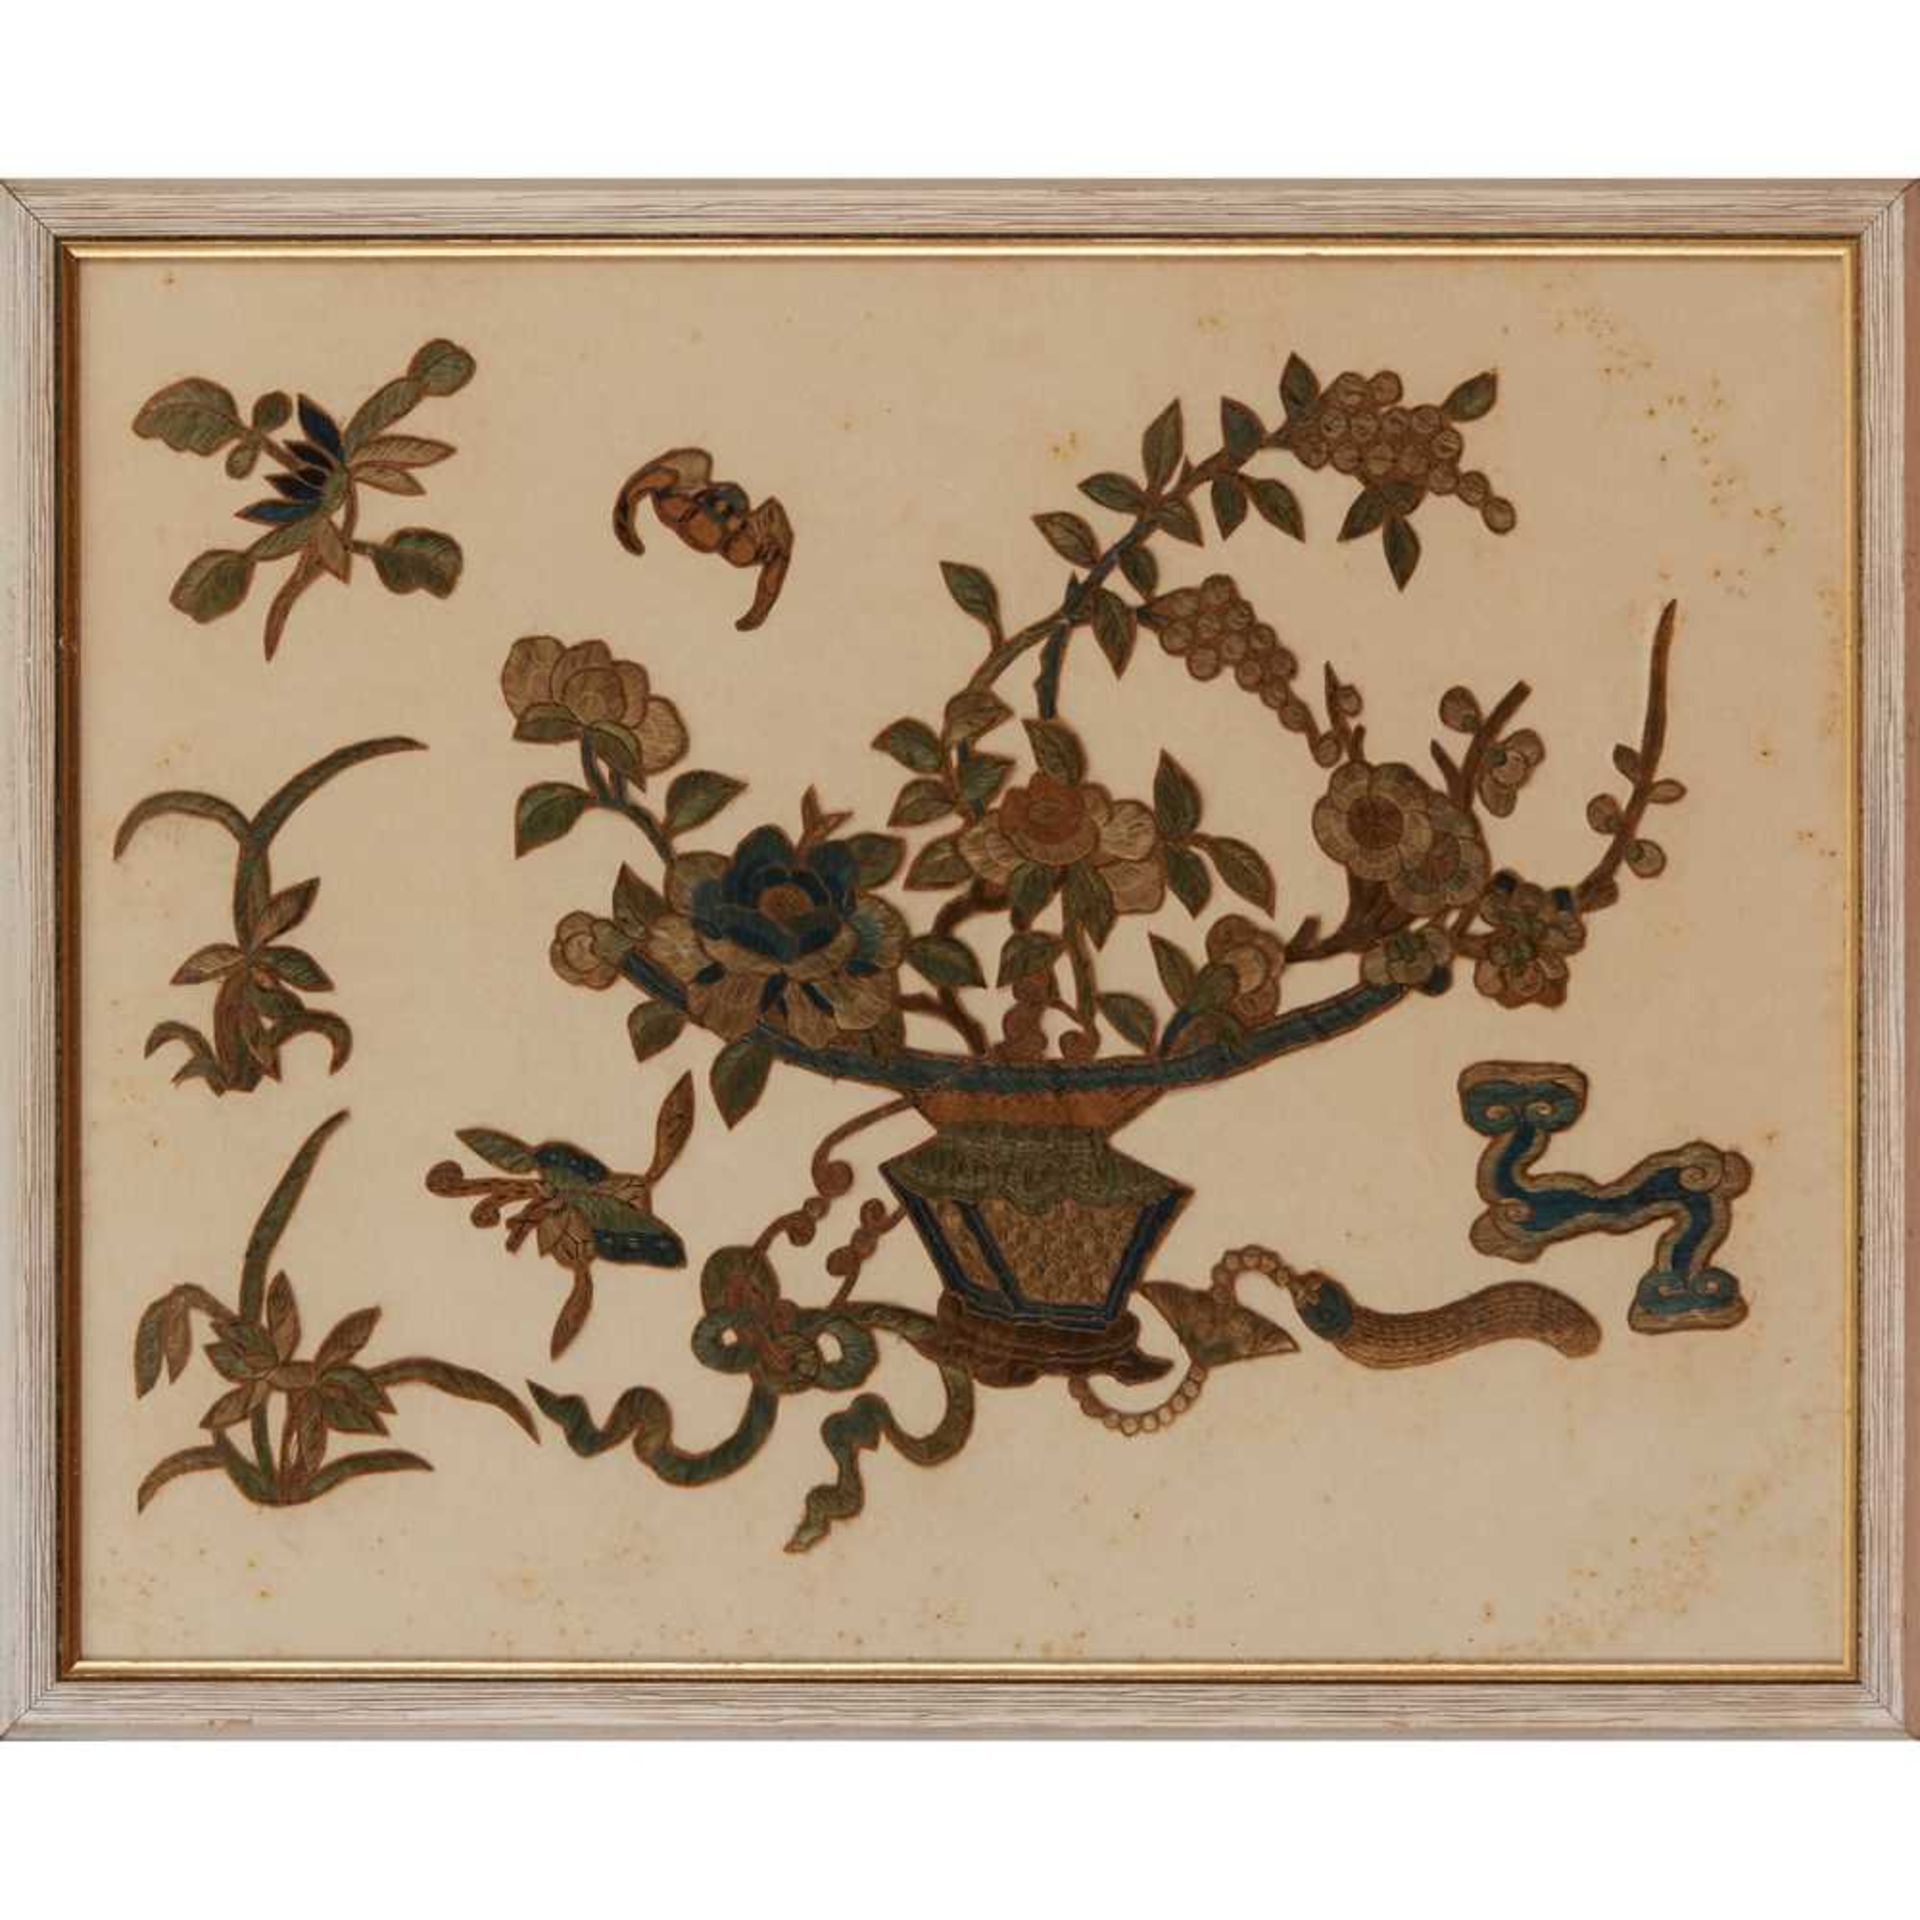 SILK EMBROIDERED MATERIALS LATE QING DYNASTY-REPUBLIC PERIOD, 19TH-20TH CENTURY - Image 5 of 9